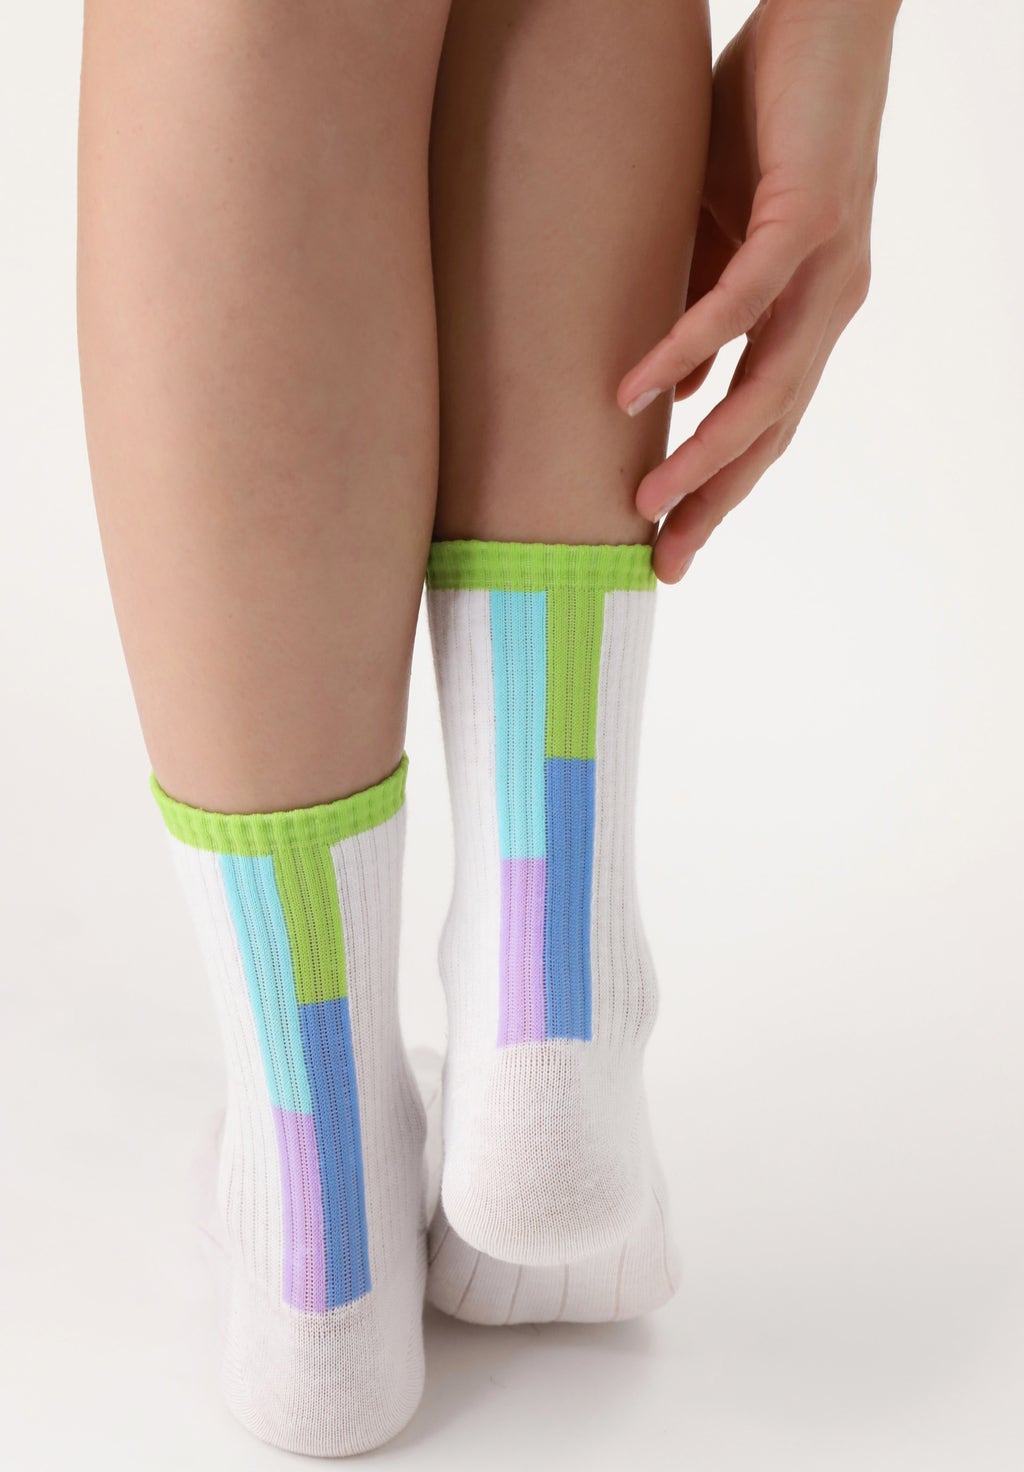 OroblÌ_ Color Block Twin Socks - Ribbed cotton mix bootie ankle high socks twin pack with shaped heel. One pair is white with lime green, blue and purple lines on the back and the other is a plain bright bold lime green colour.